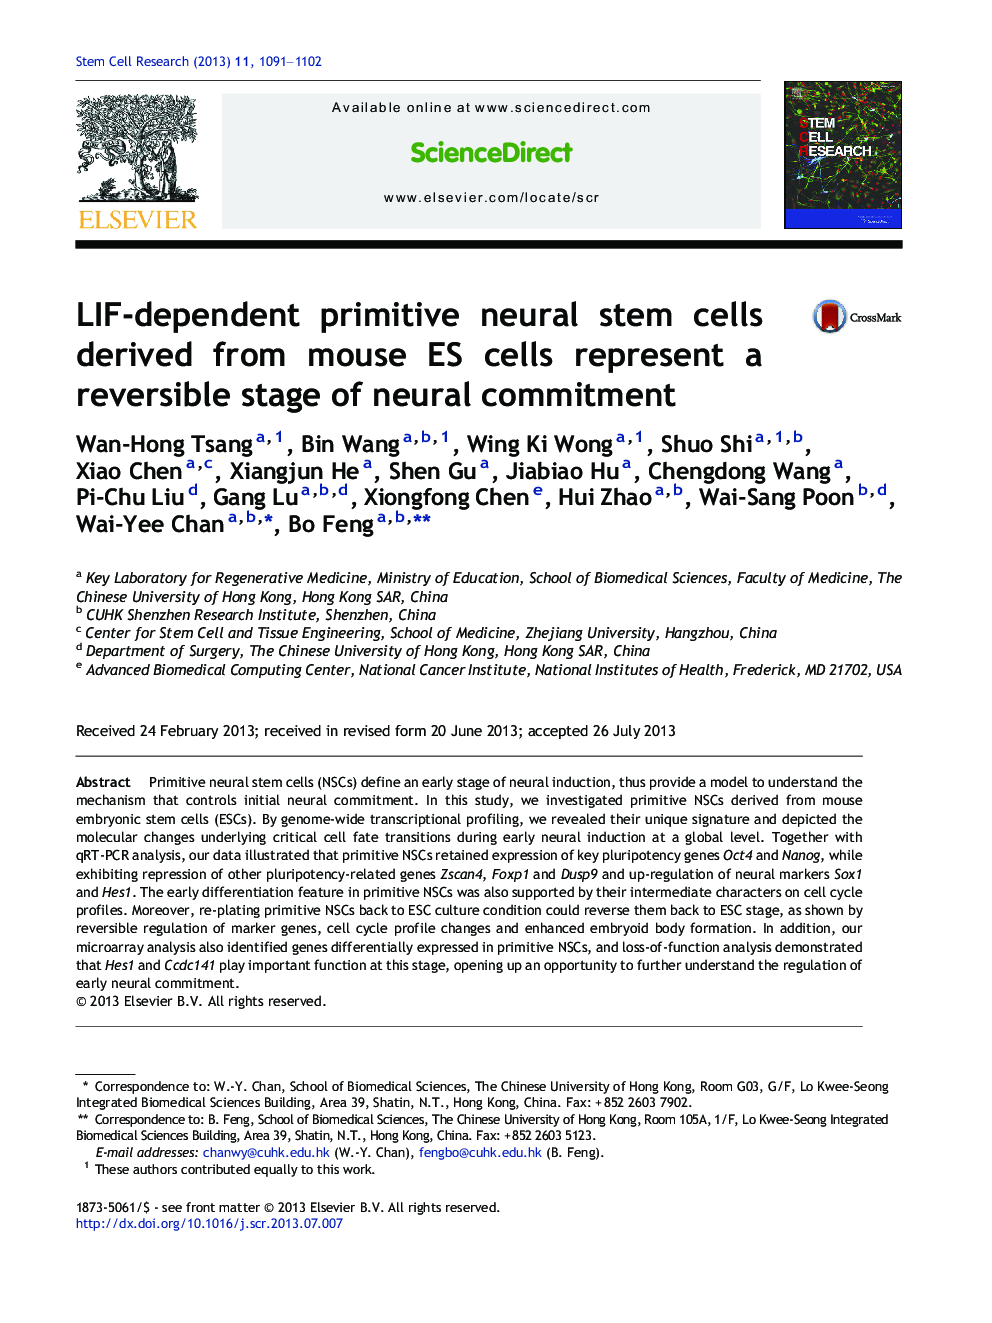 LIF-dependent primitive neural stem cells derived from mouse ES cells represent a reversible stage of neural commitment